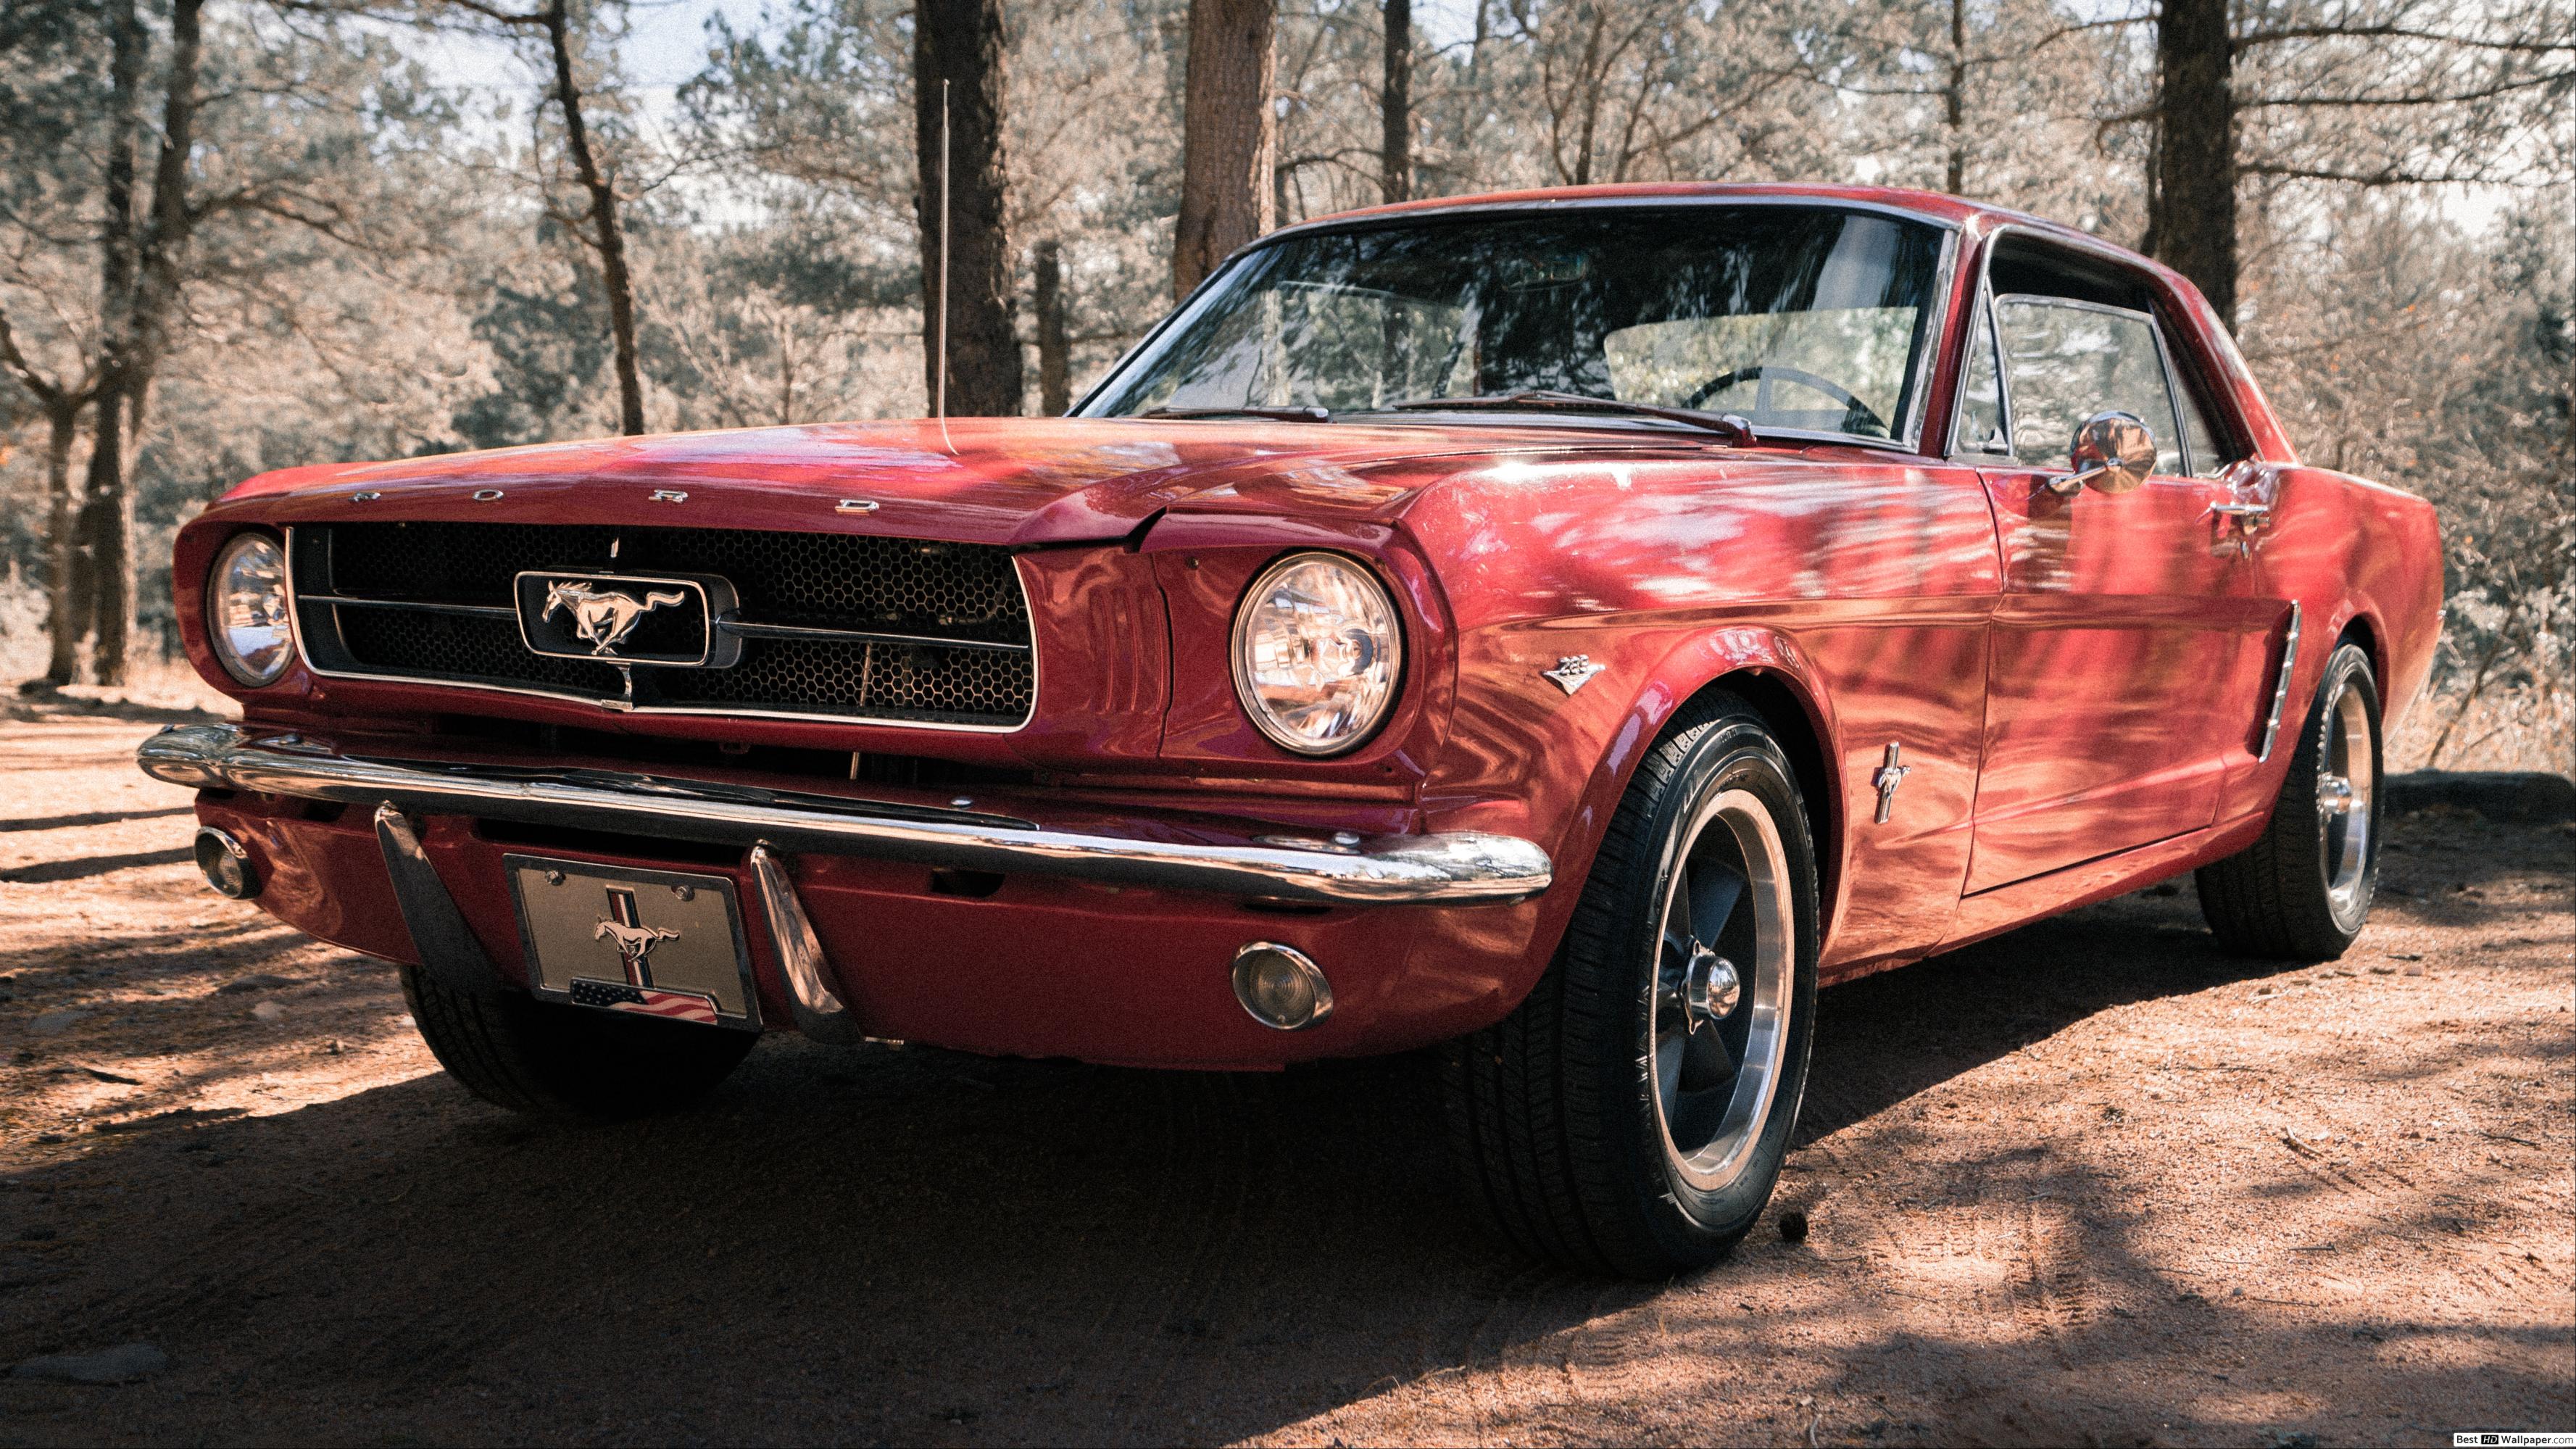 Red Ford Mustang 1967 HD wallpaper download